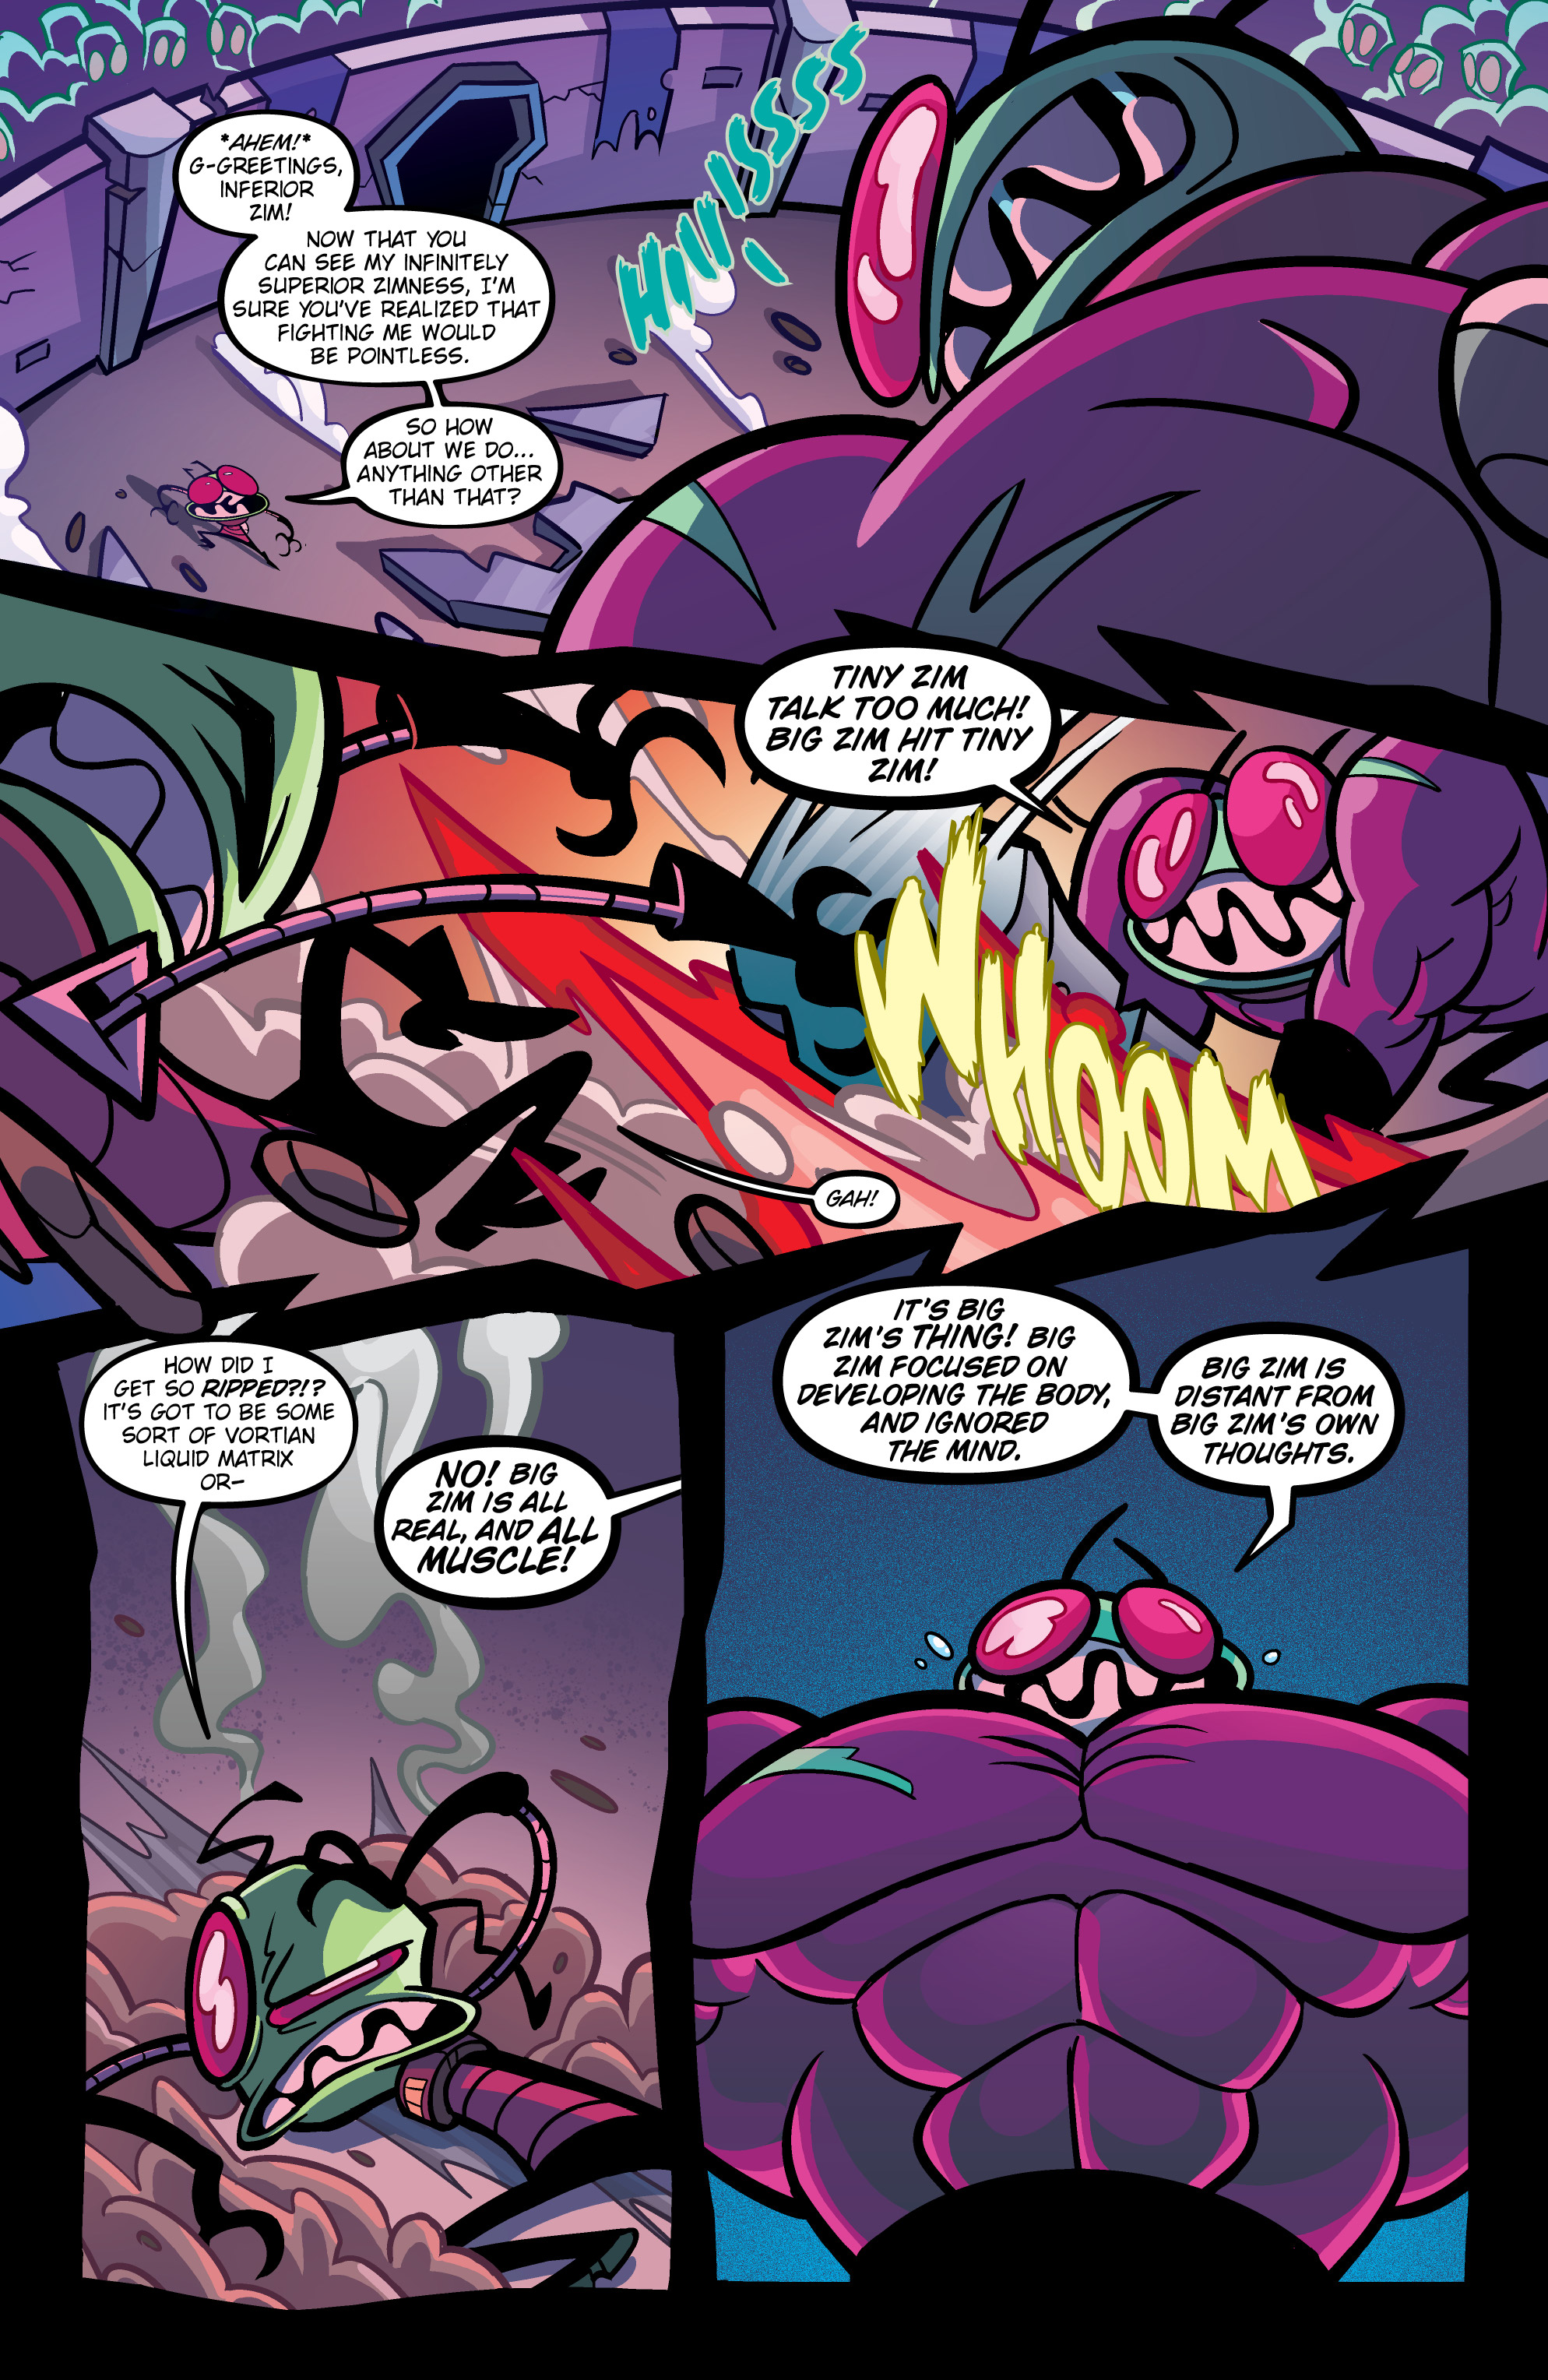 Invader Zim (2015-): Chapter 48 - Page 3